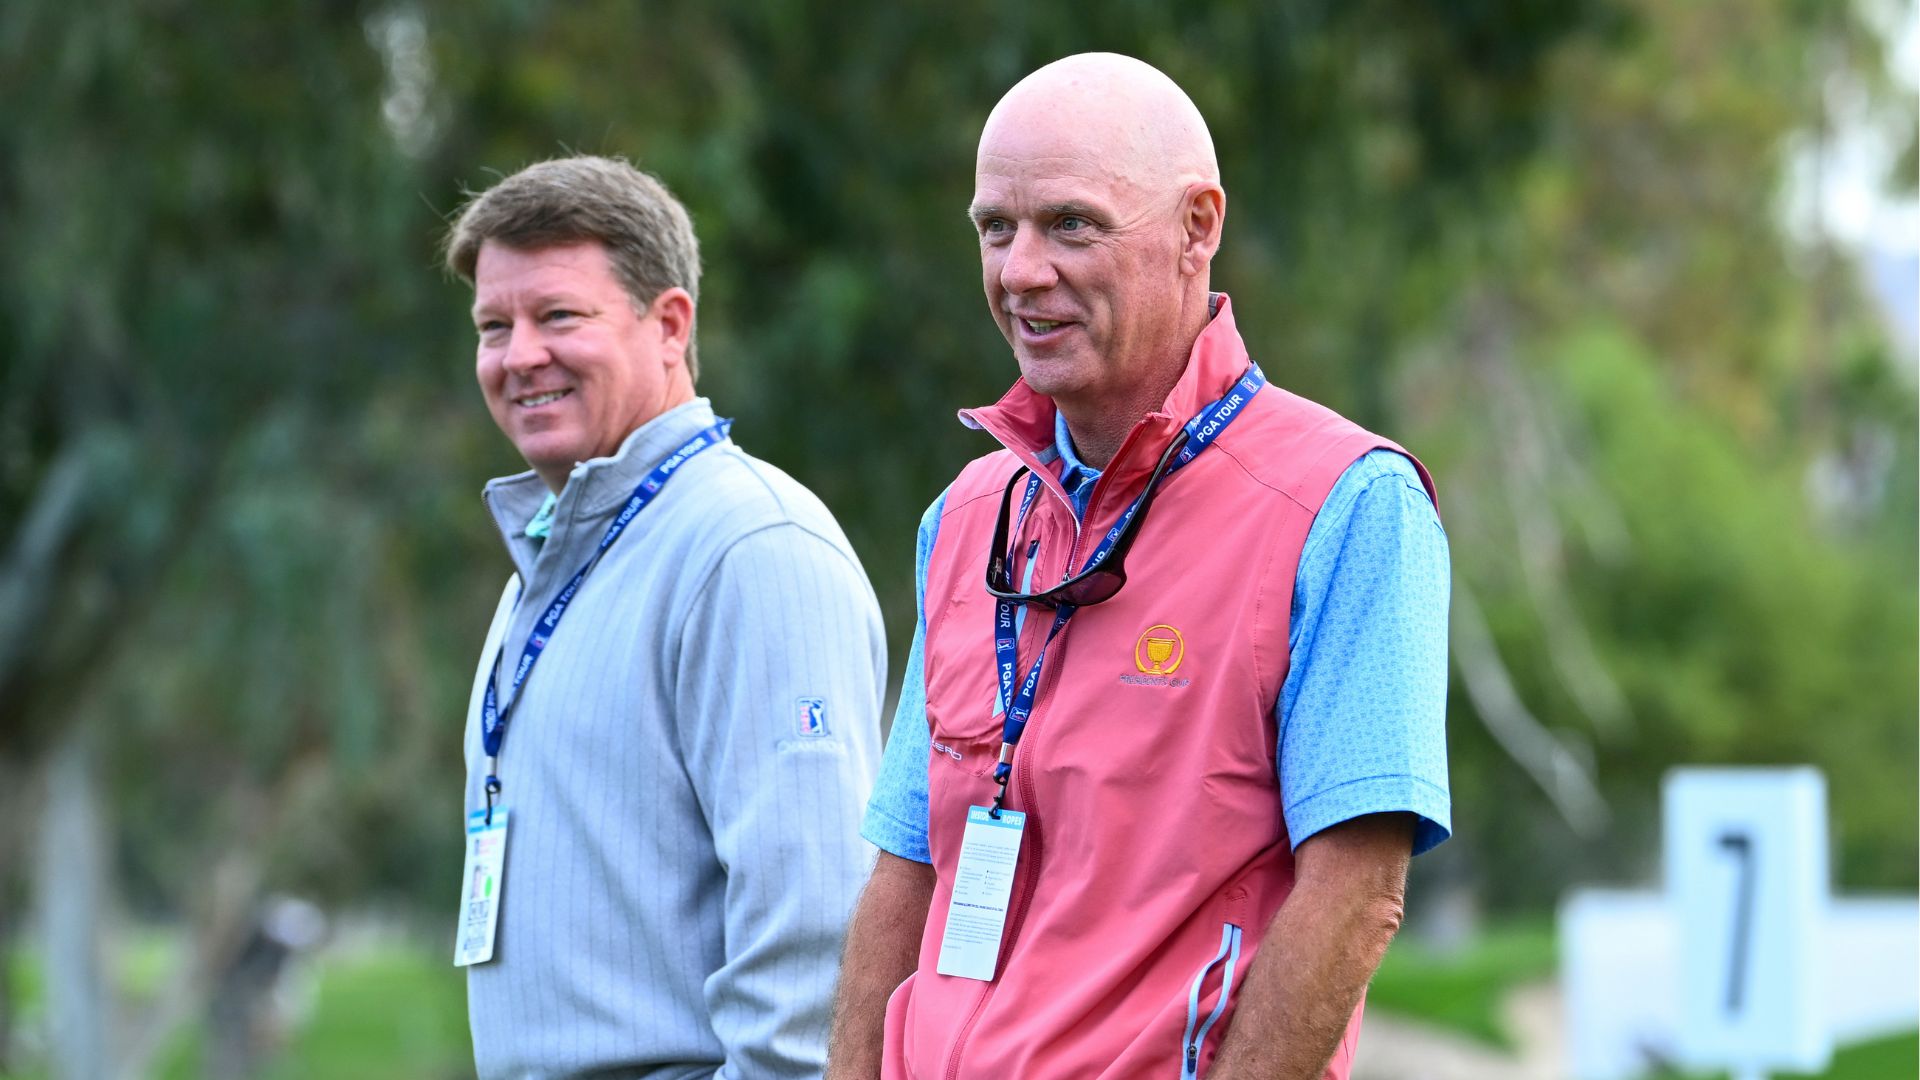 PGA Tour’s chief tournaments and competitions officer Andy Pazder resigns